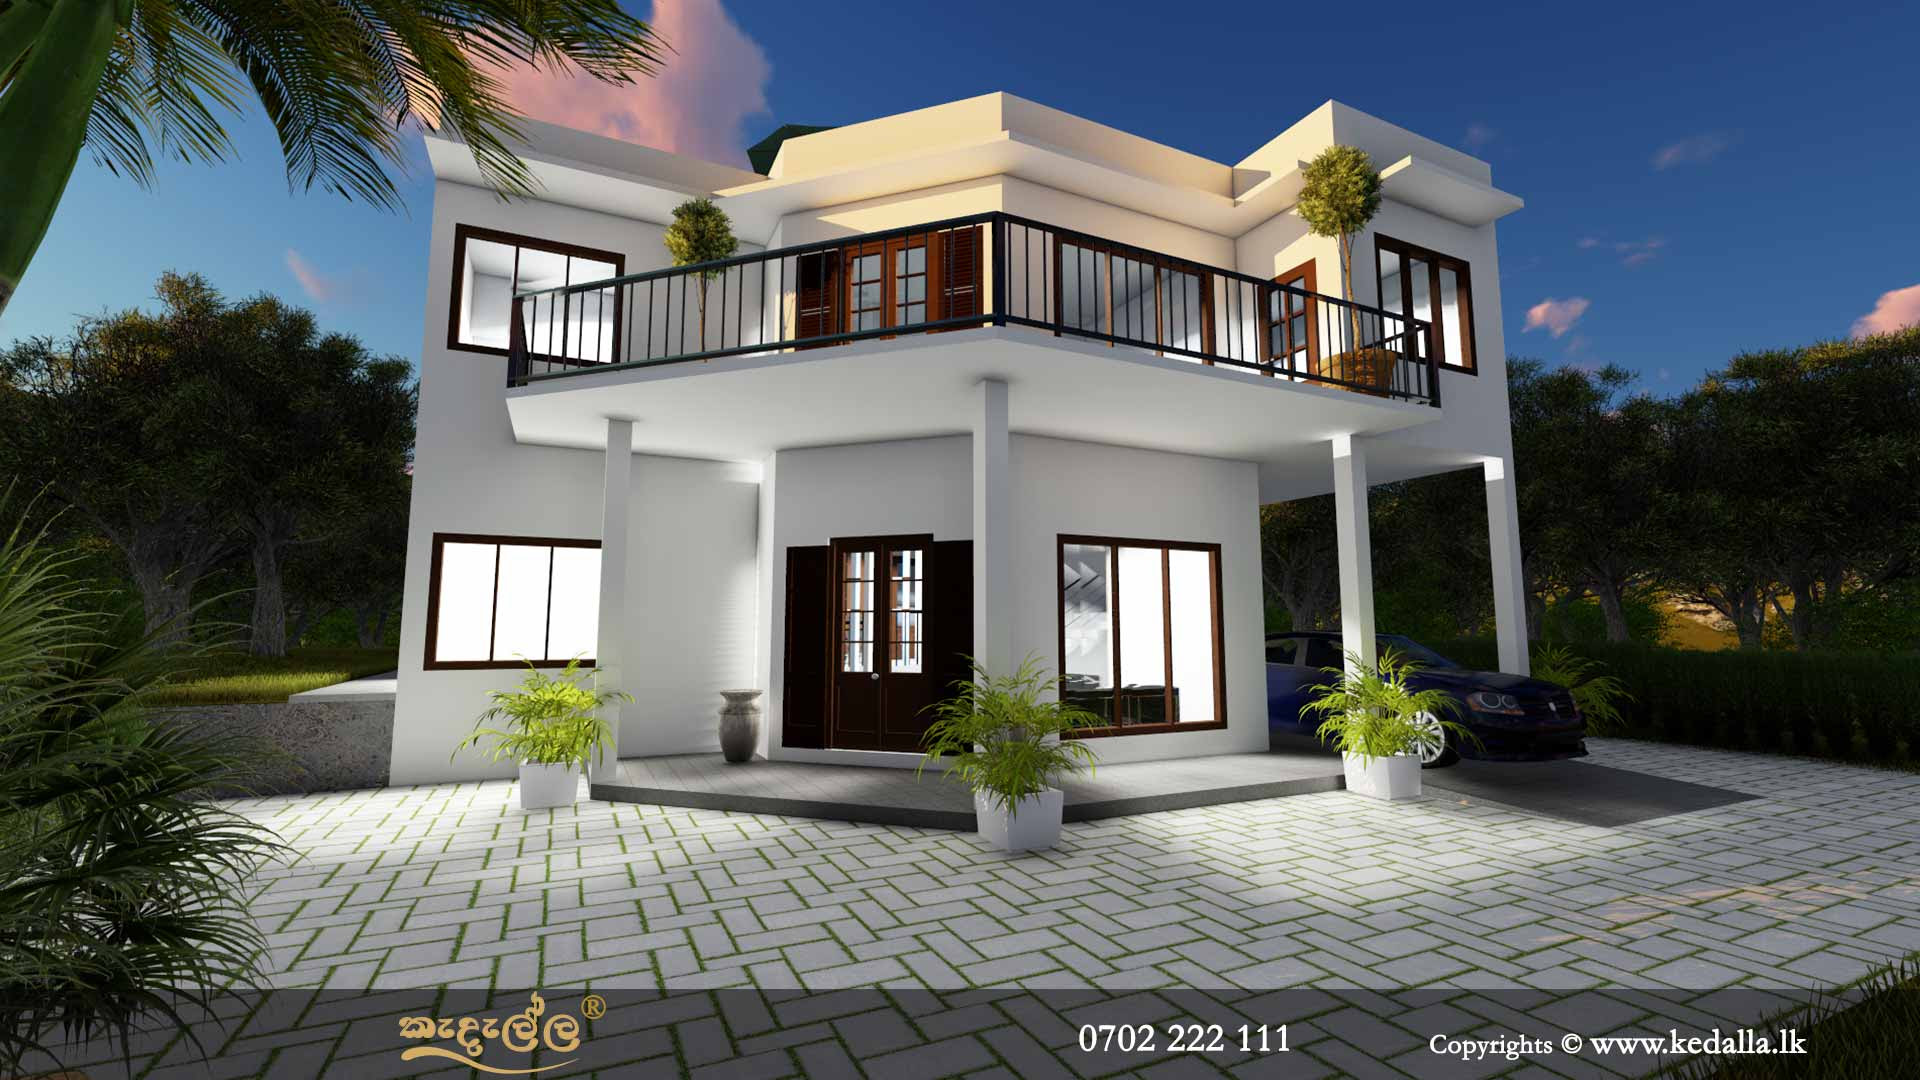 Beautiful Small House Designs Pictures In Sri Lanka